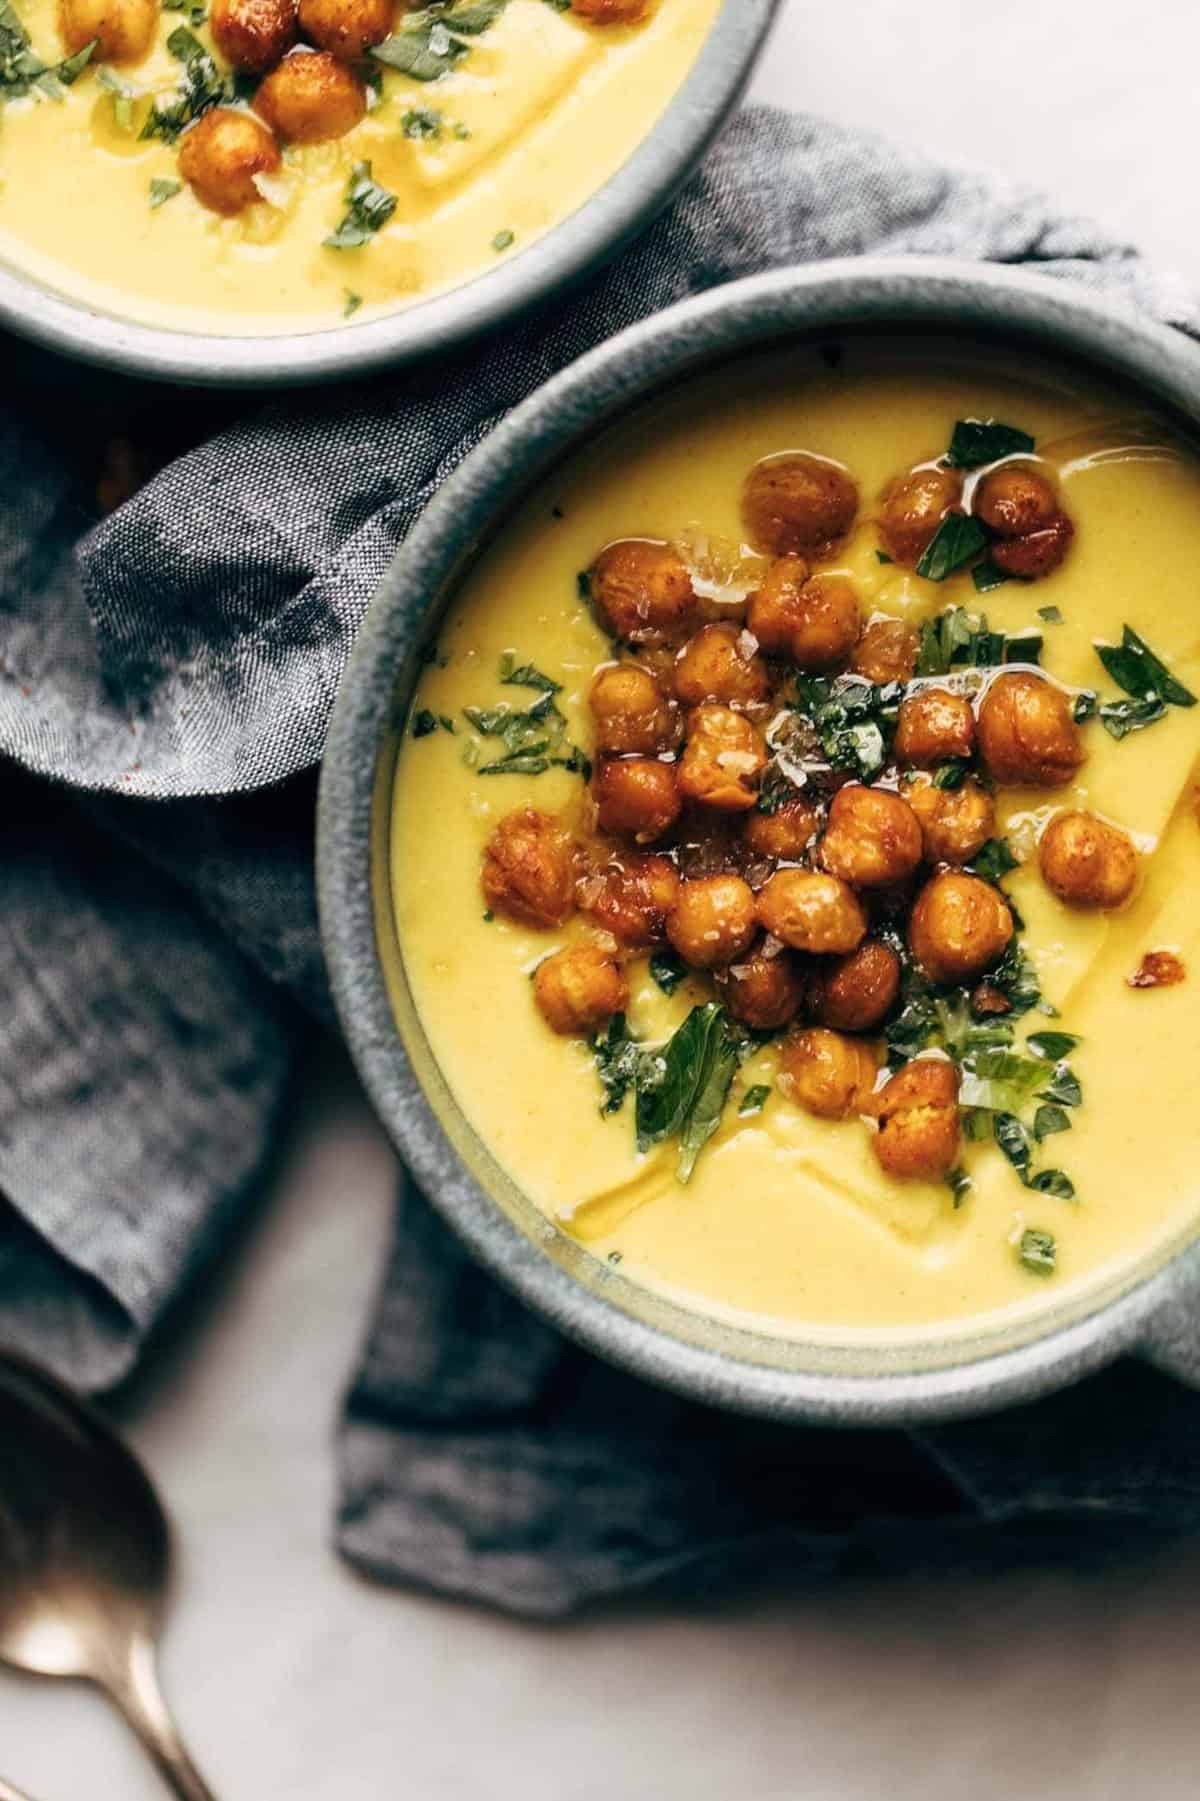  A festive soup that's as beautiful as it is delicious